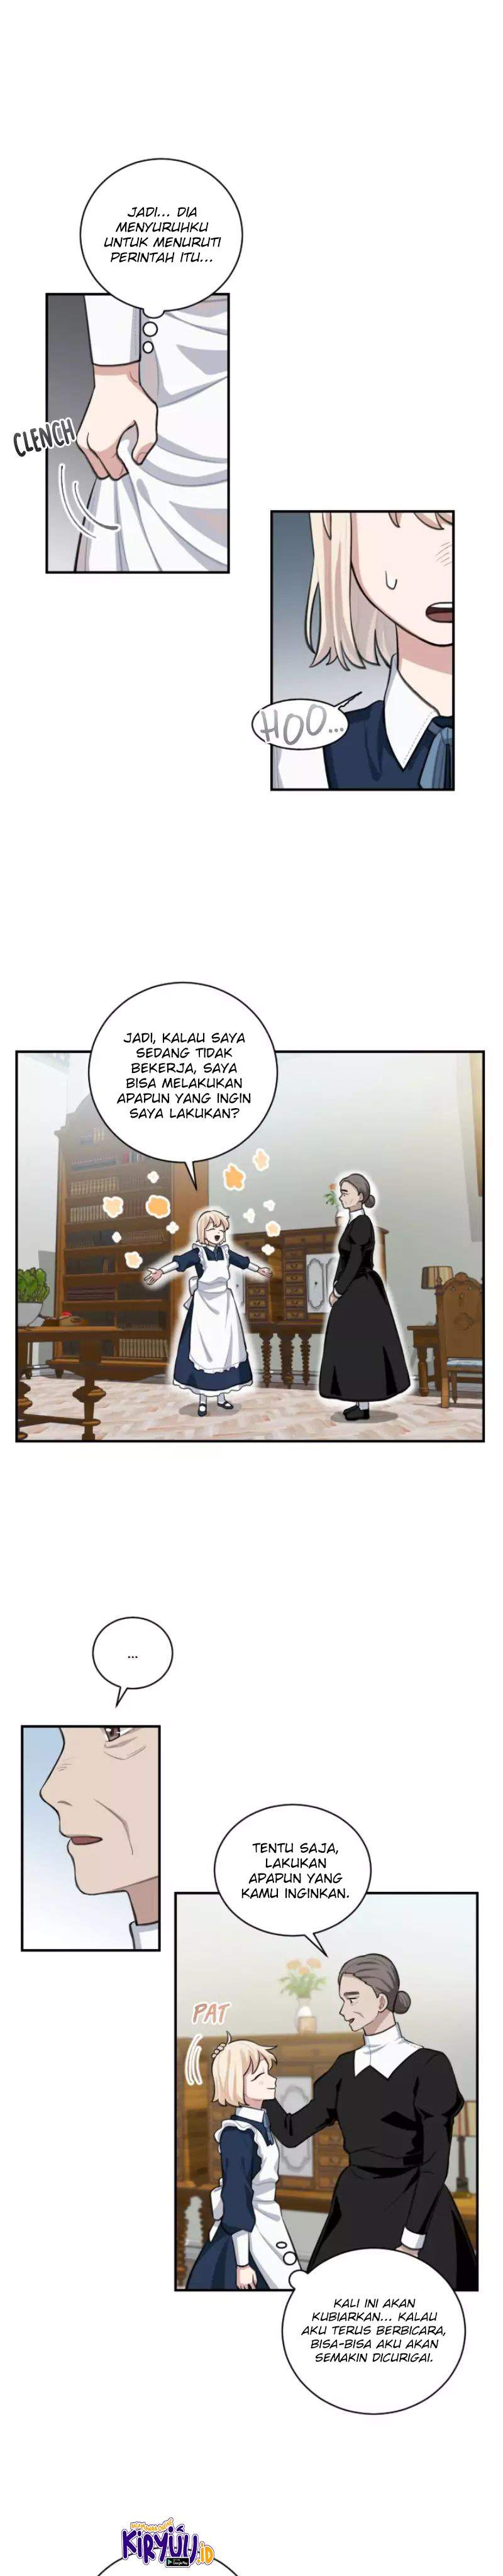 I Became a Maid in a TL Novel Chapter 06